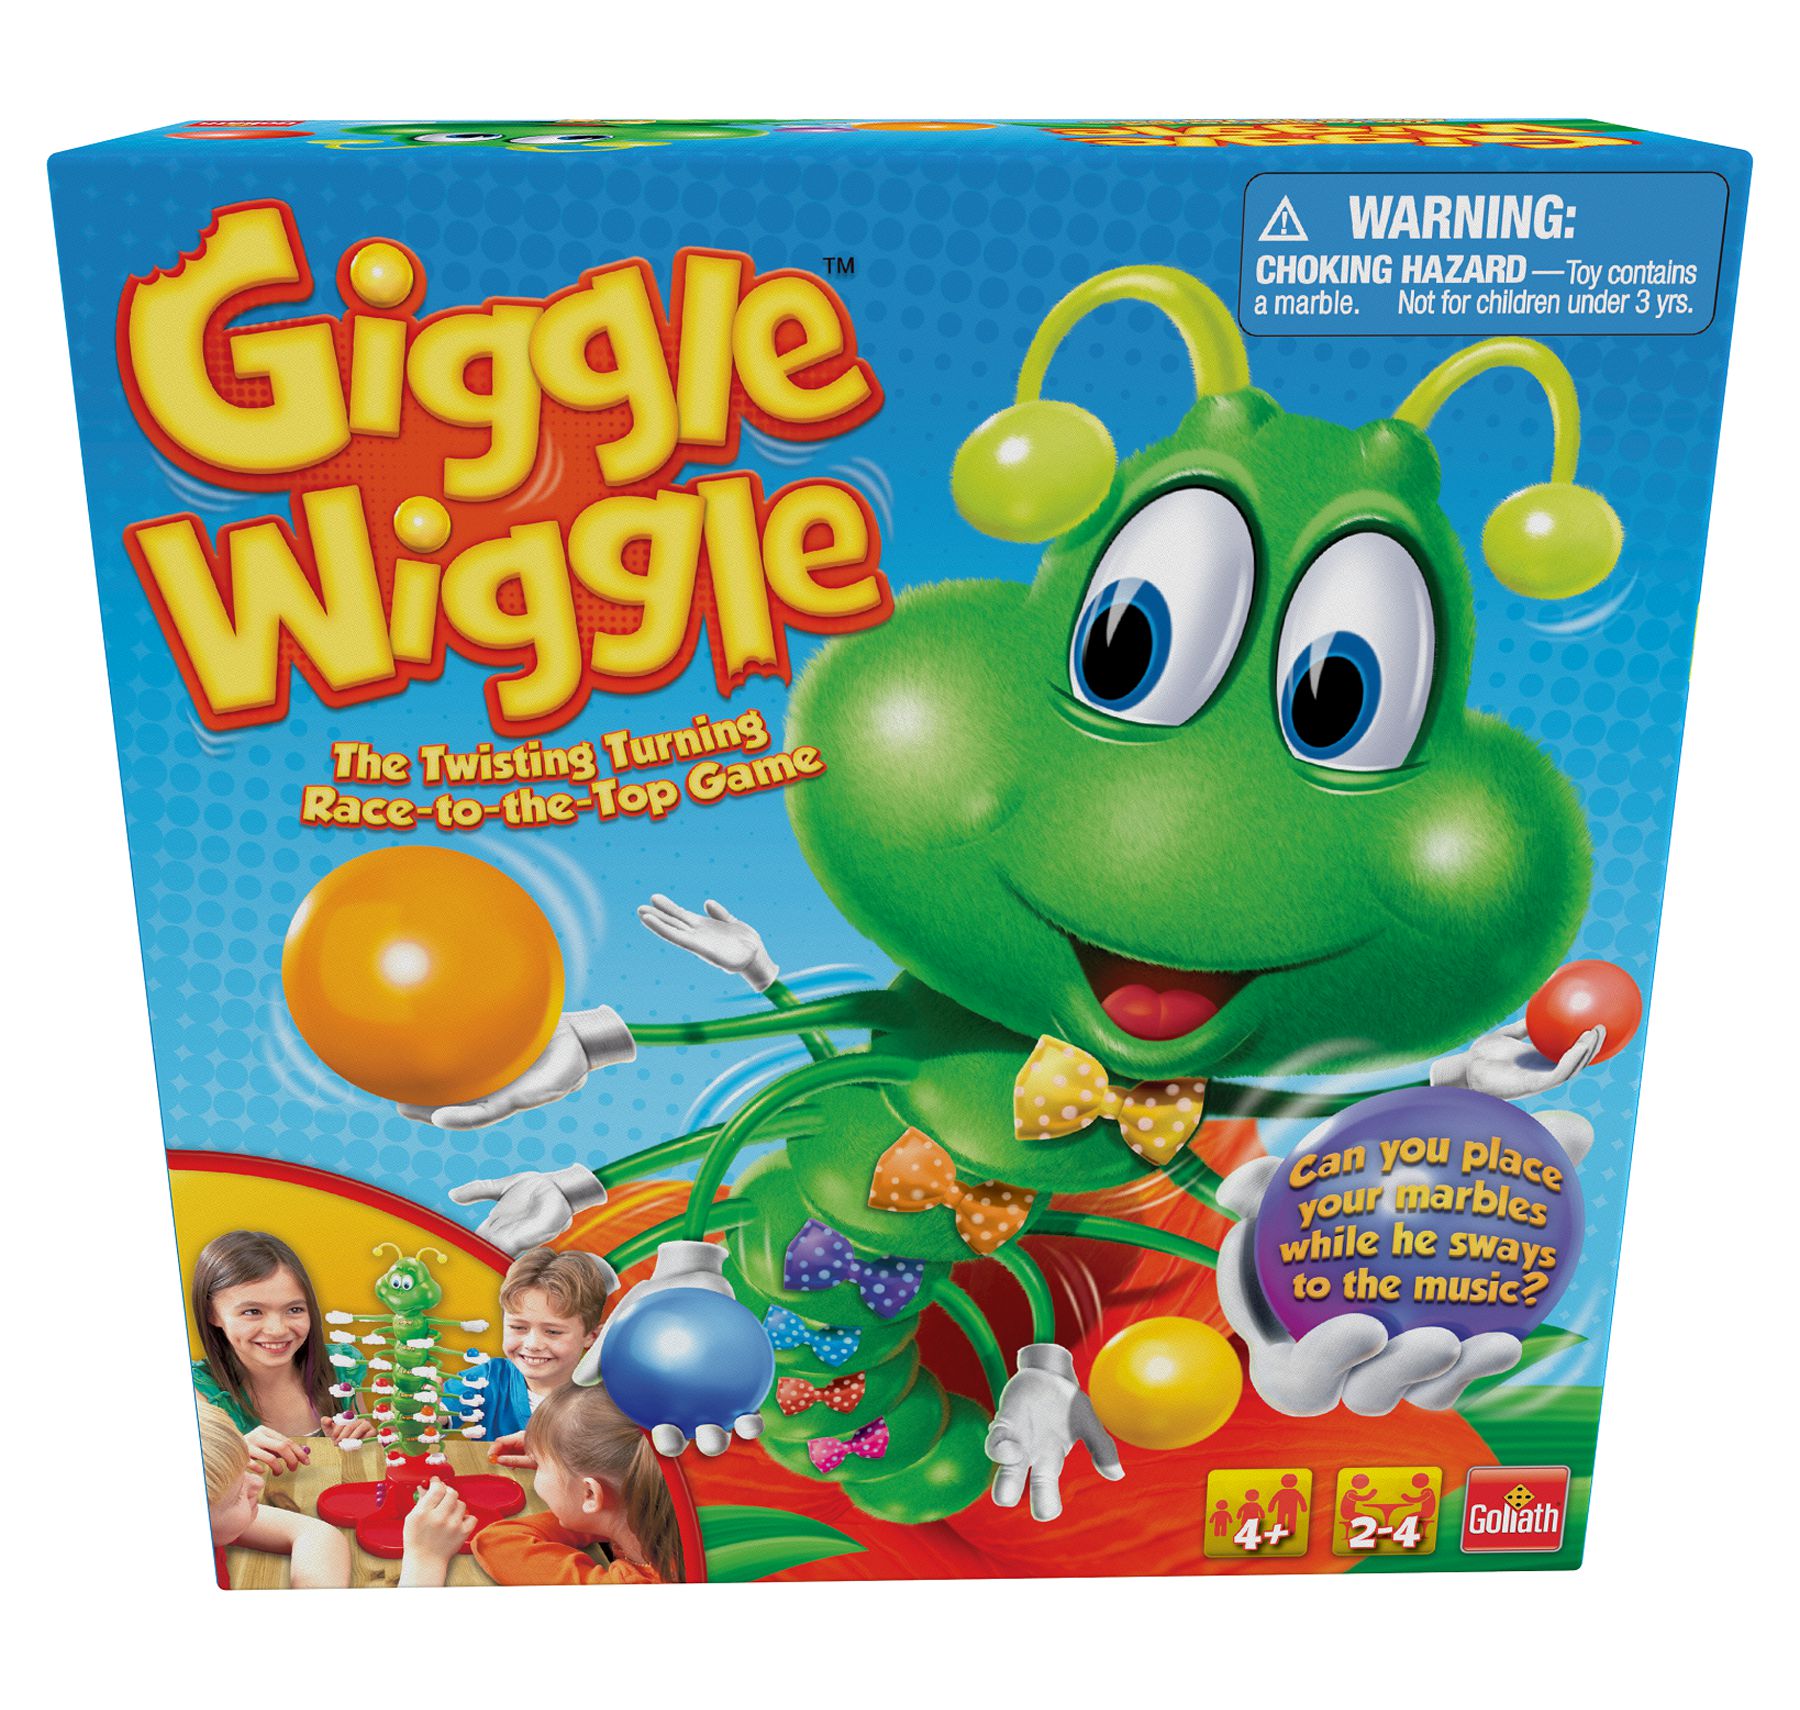 Giggle Wiggle - the Twisting Turning Race to Get Your Marbles to the Top Game by Goliath - image 1 of 8